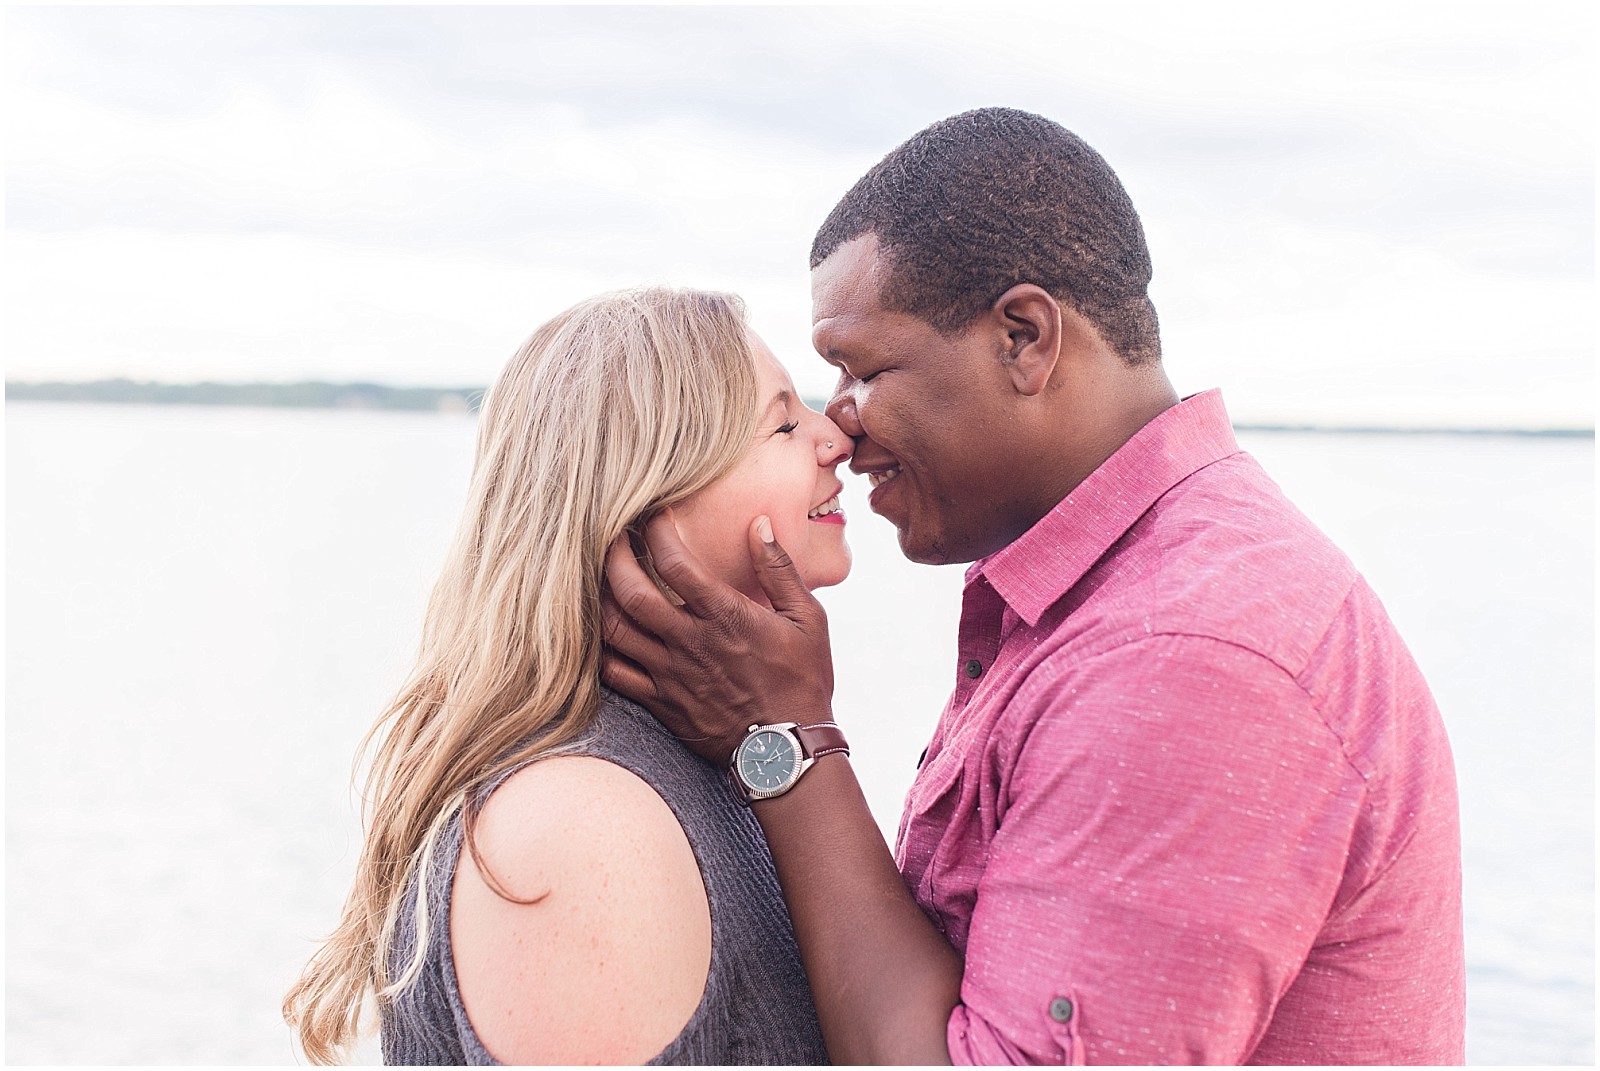 mackworth island engagement session photos by the ocean.